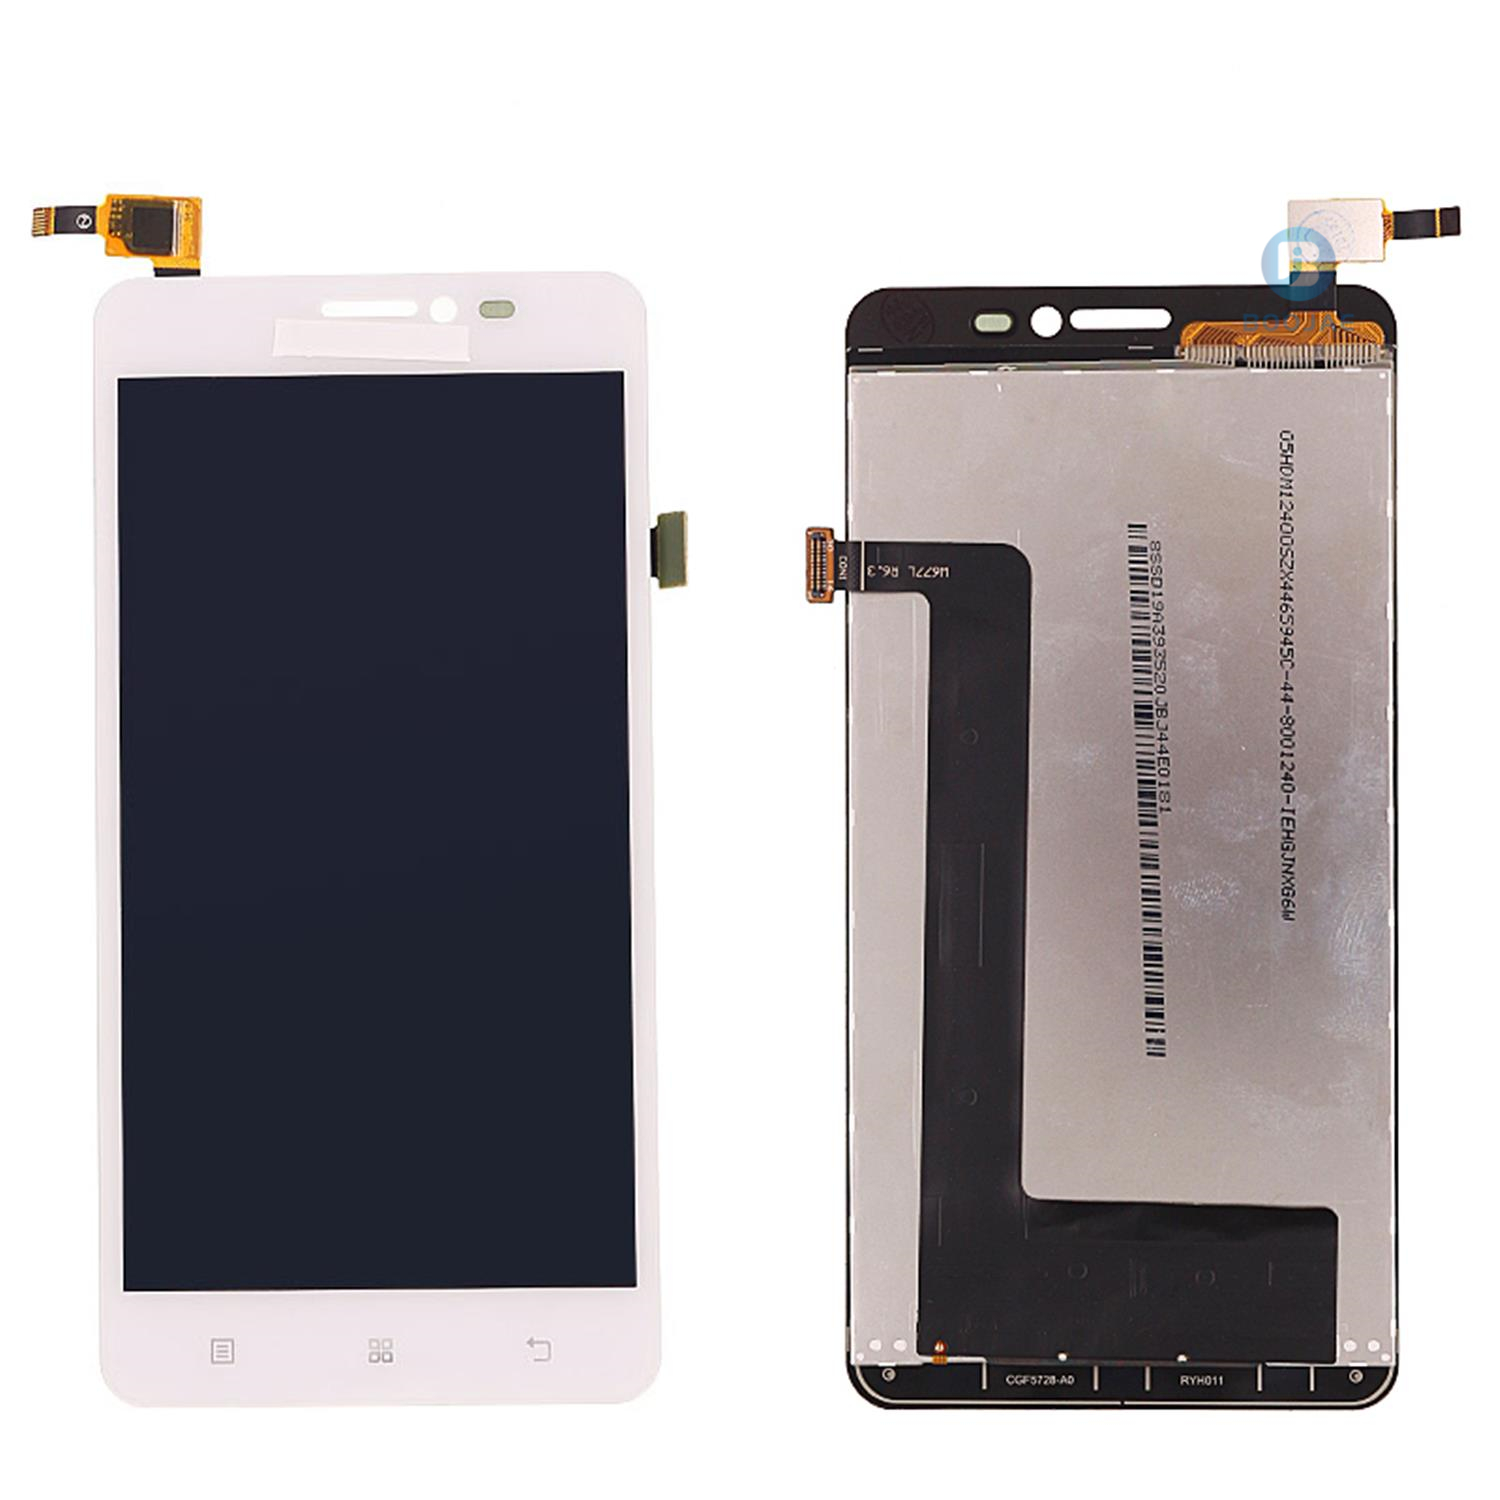 For Lenovo S850 LCD Screen Display and Touch Panel Digitizer Assembly Replacement